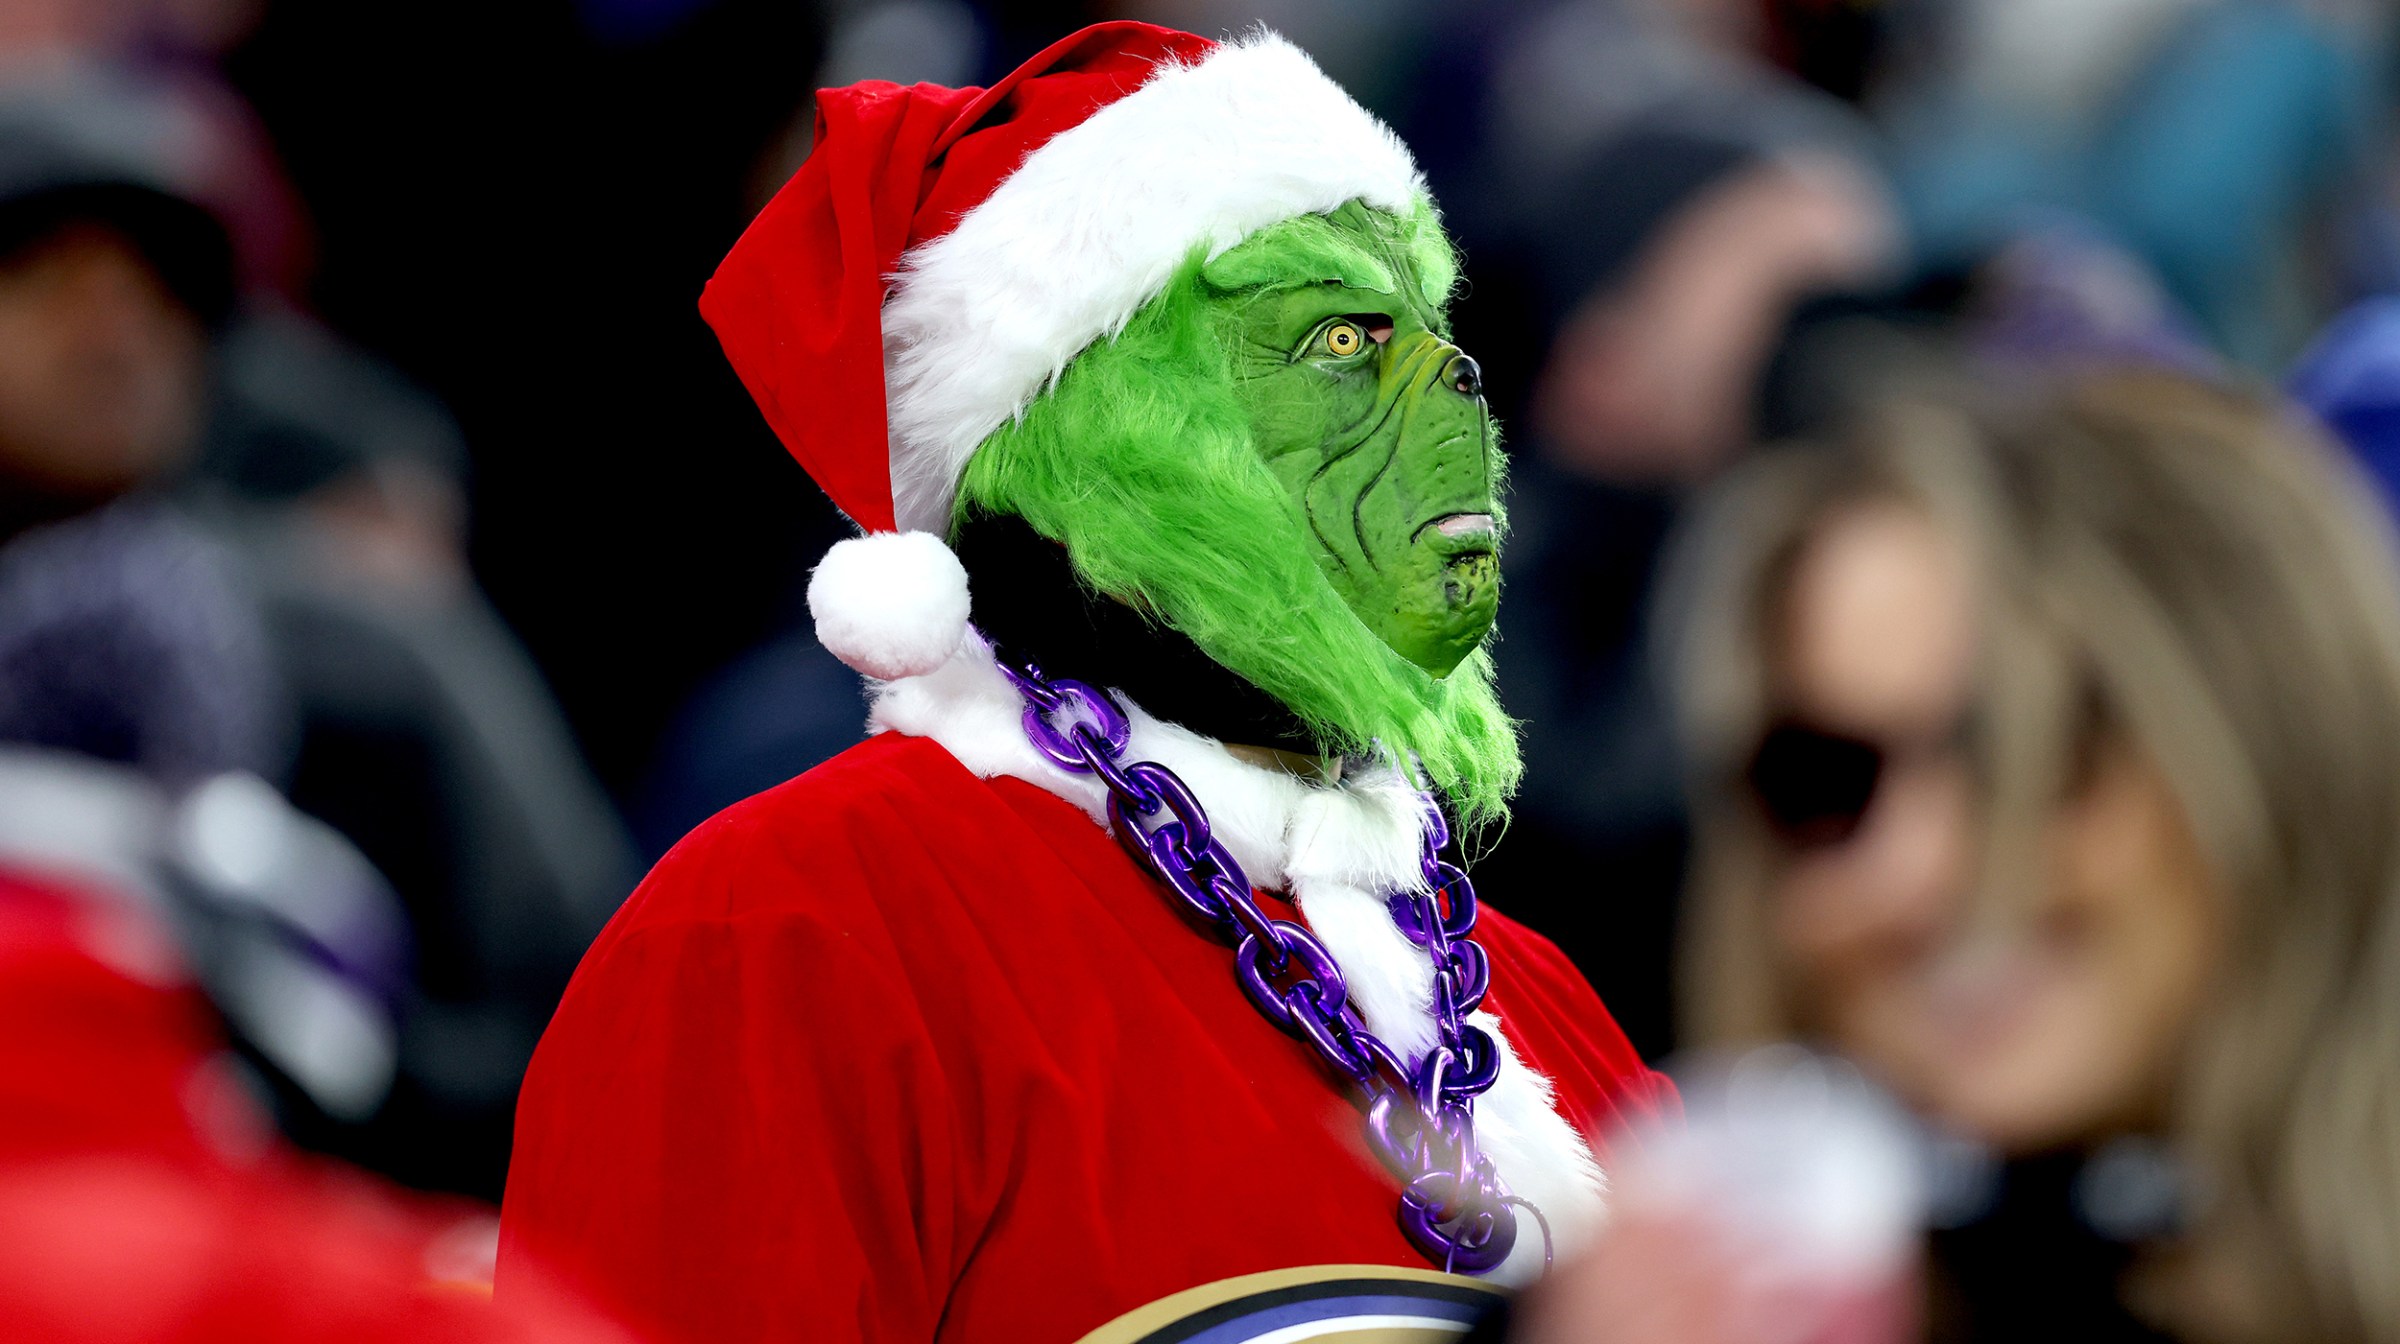 A masked fan of the Baltimore Ravens looks on during the game between the Green Bay Packers and the Baltimore Ravens at M&amp;T Bank Stadium on December 19, 2021 in Baltimore, Maryland.